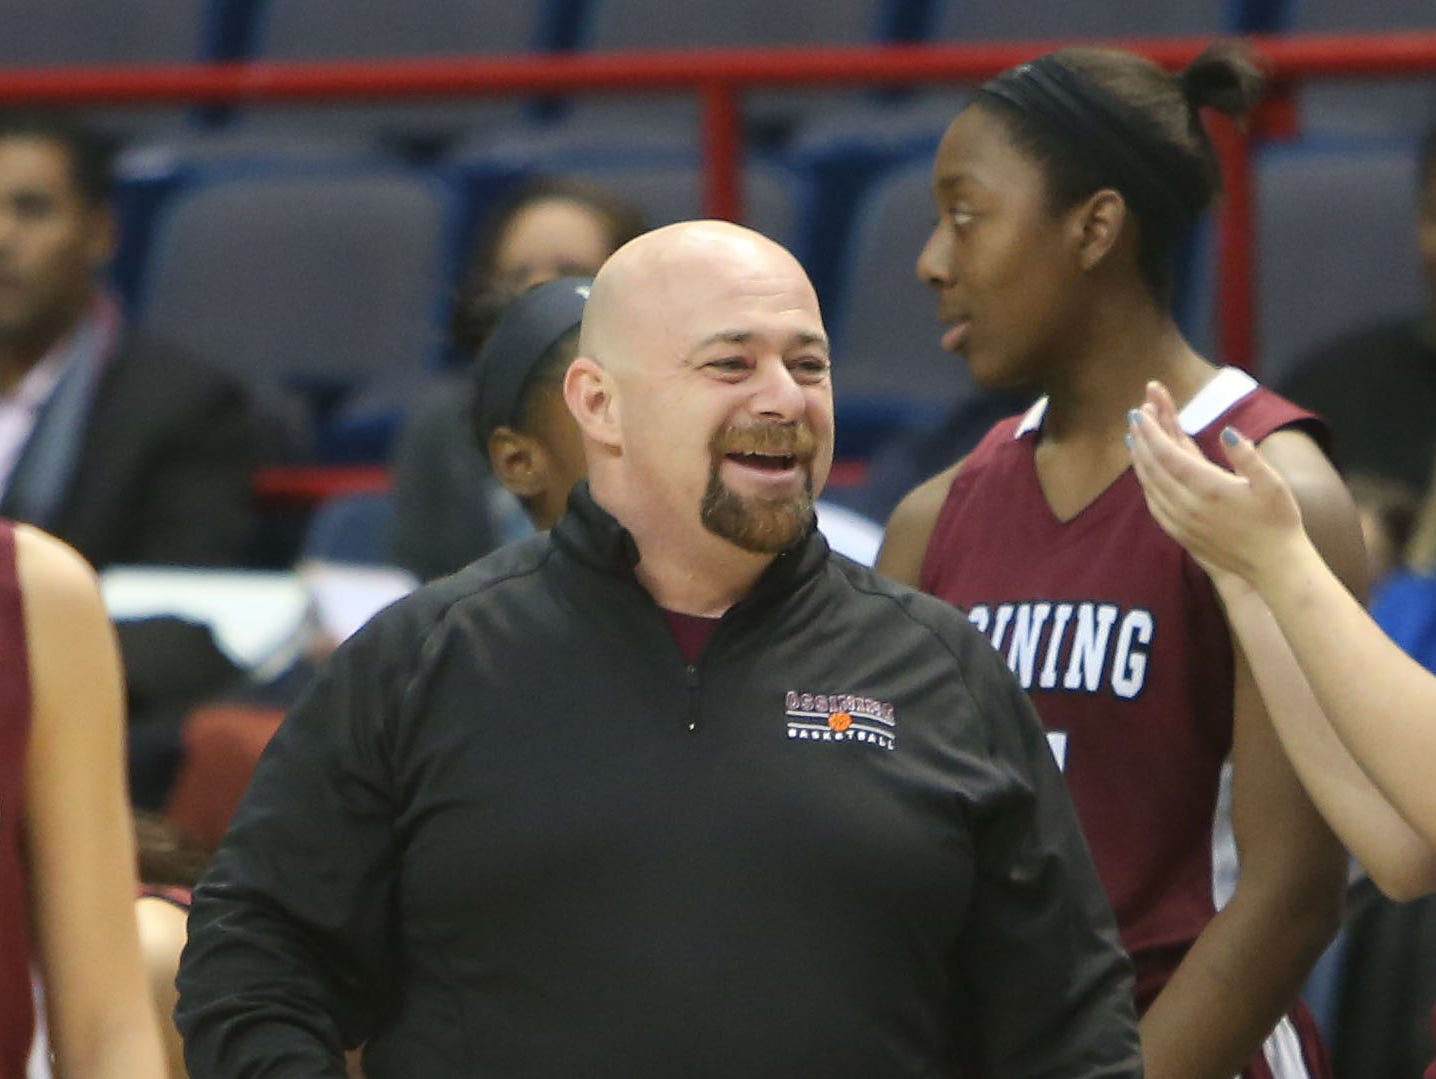 Ossining defeated Long Island Lutheran 64-54 in the girls Class A final of the New York State Federation Tournament of Champions at the Times Union Center in Albany March 19, 2016.